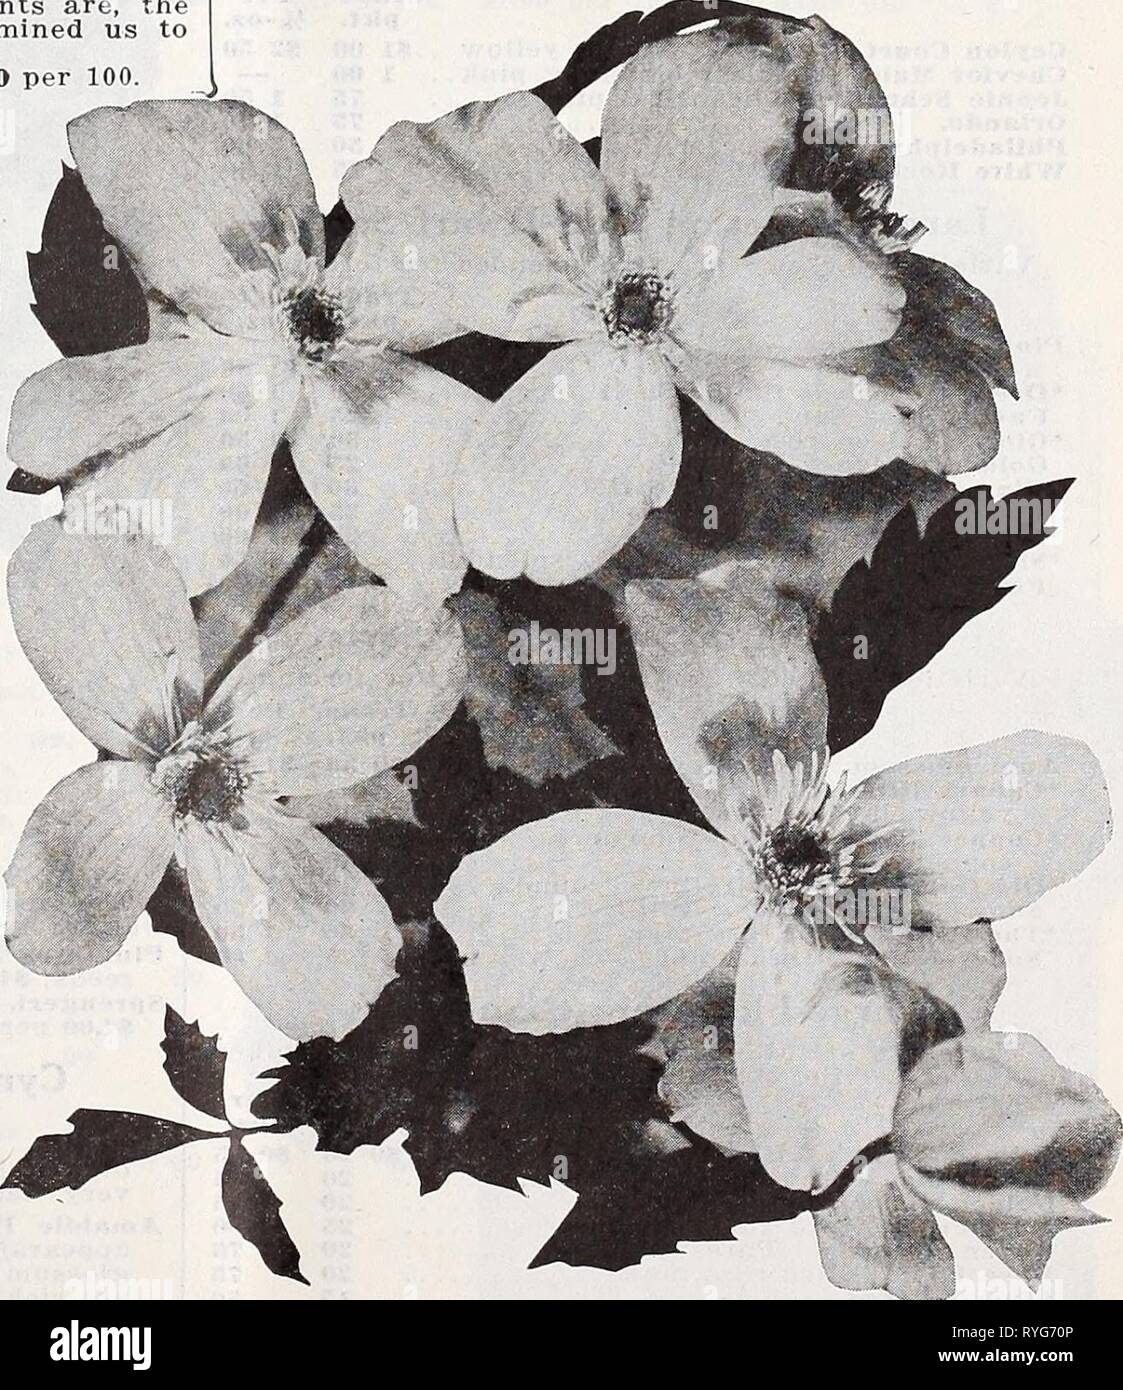 Dreer's wholesale price list for florists : bulbs flower seeds lawn grass seeds plants sundries  dreerswholesalep1932henr Year: 1932  Select Hardy Vines and Climbers We Make No Charge for Boxes or Packing Strong per 100. Actinidia Arguta (Si lver A'ine) Strong' two-year-old plants, $7.50 per doz. Akebia Quinata two-year-old plants, $3.50 per doz.; $25.00 Ampelopsis Engelmanni Strong two-year-old plants of this most useful variety. $3.00 per doz.; $20.00 per 100. Ampelopsis Lowi The miniature-leaved form of Ampelopsis Veitchi. 3-inch pots, $3.50 per doz.; $25.00 per 100. Ampelopsis Quinquefolia Stock Photo